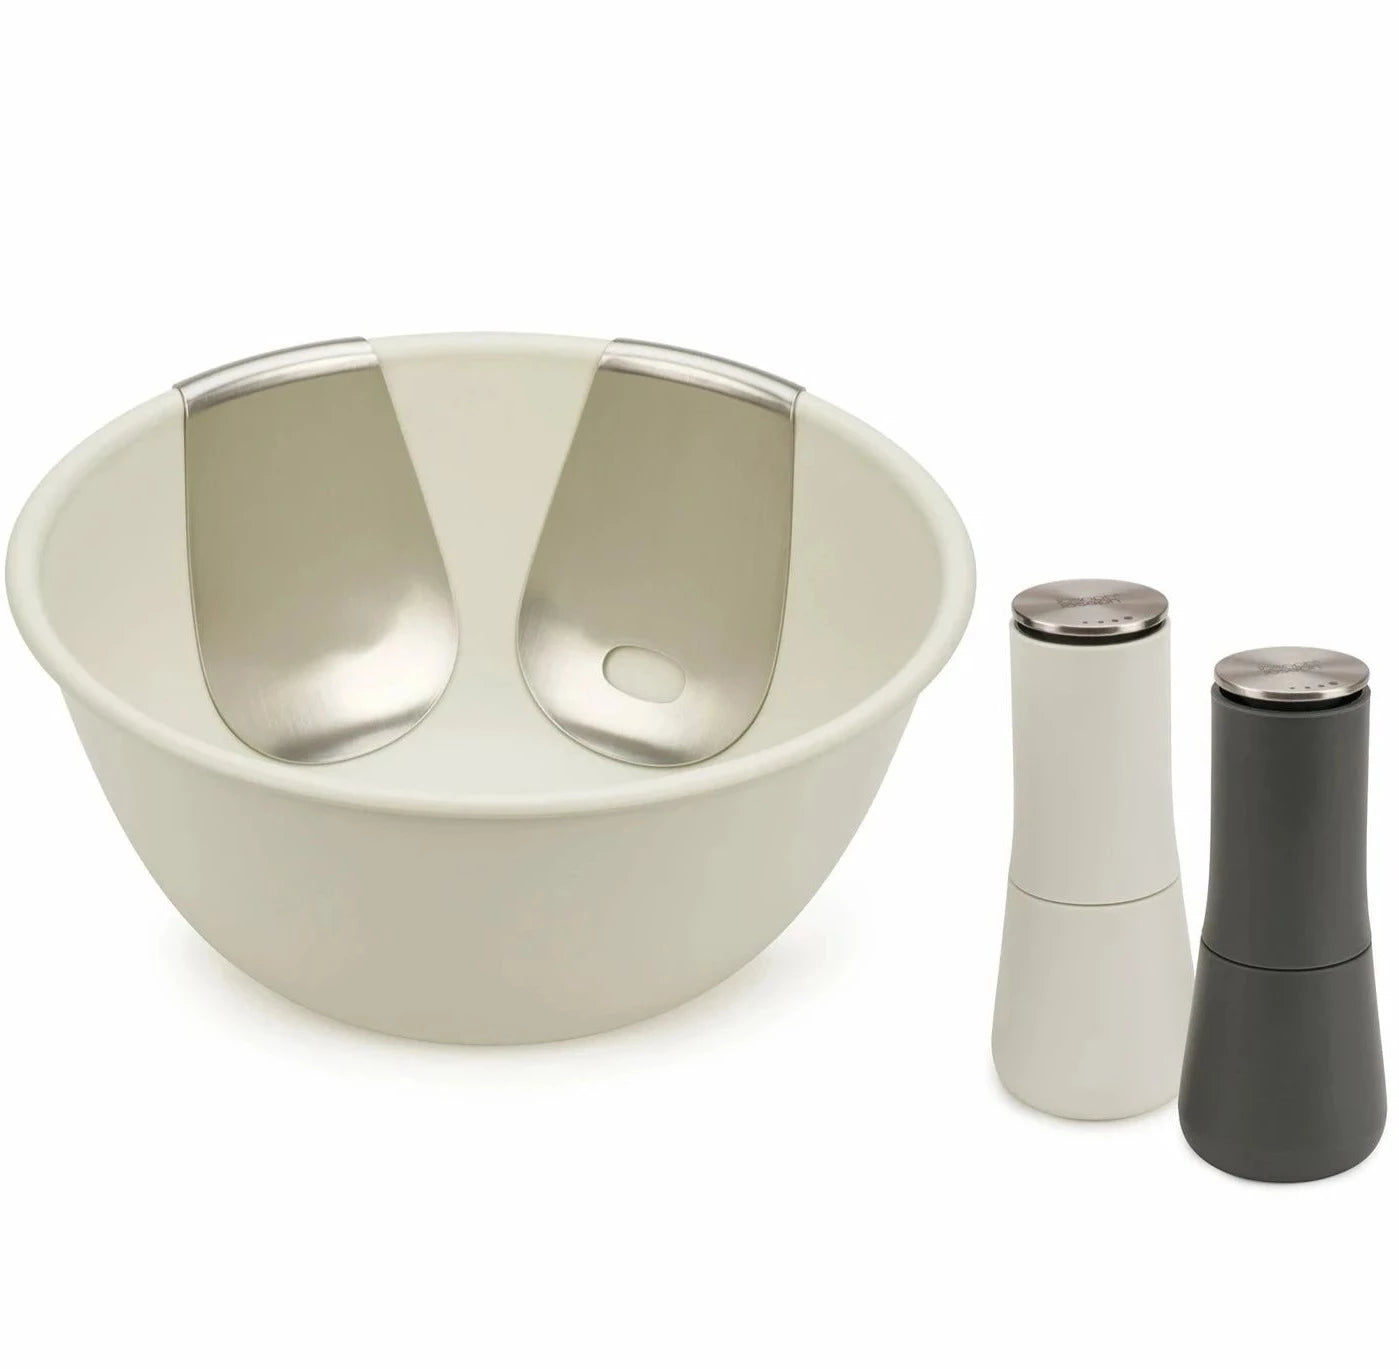 Joseph Joseph Serve it in Style Salad Bowl and Servers with Salt and Pepper Mill Set: 20184